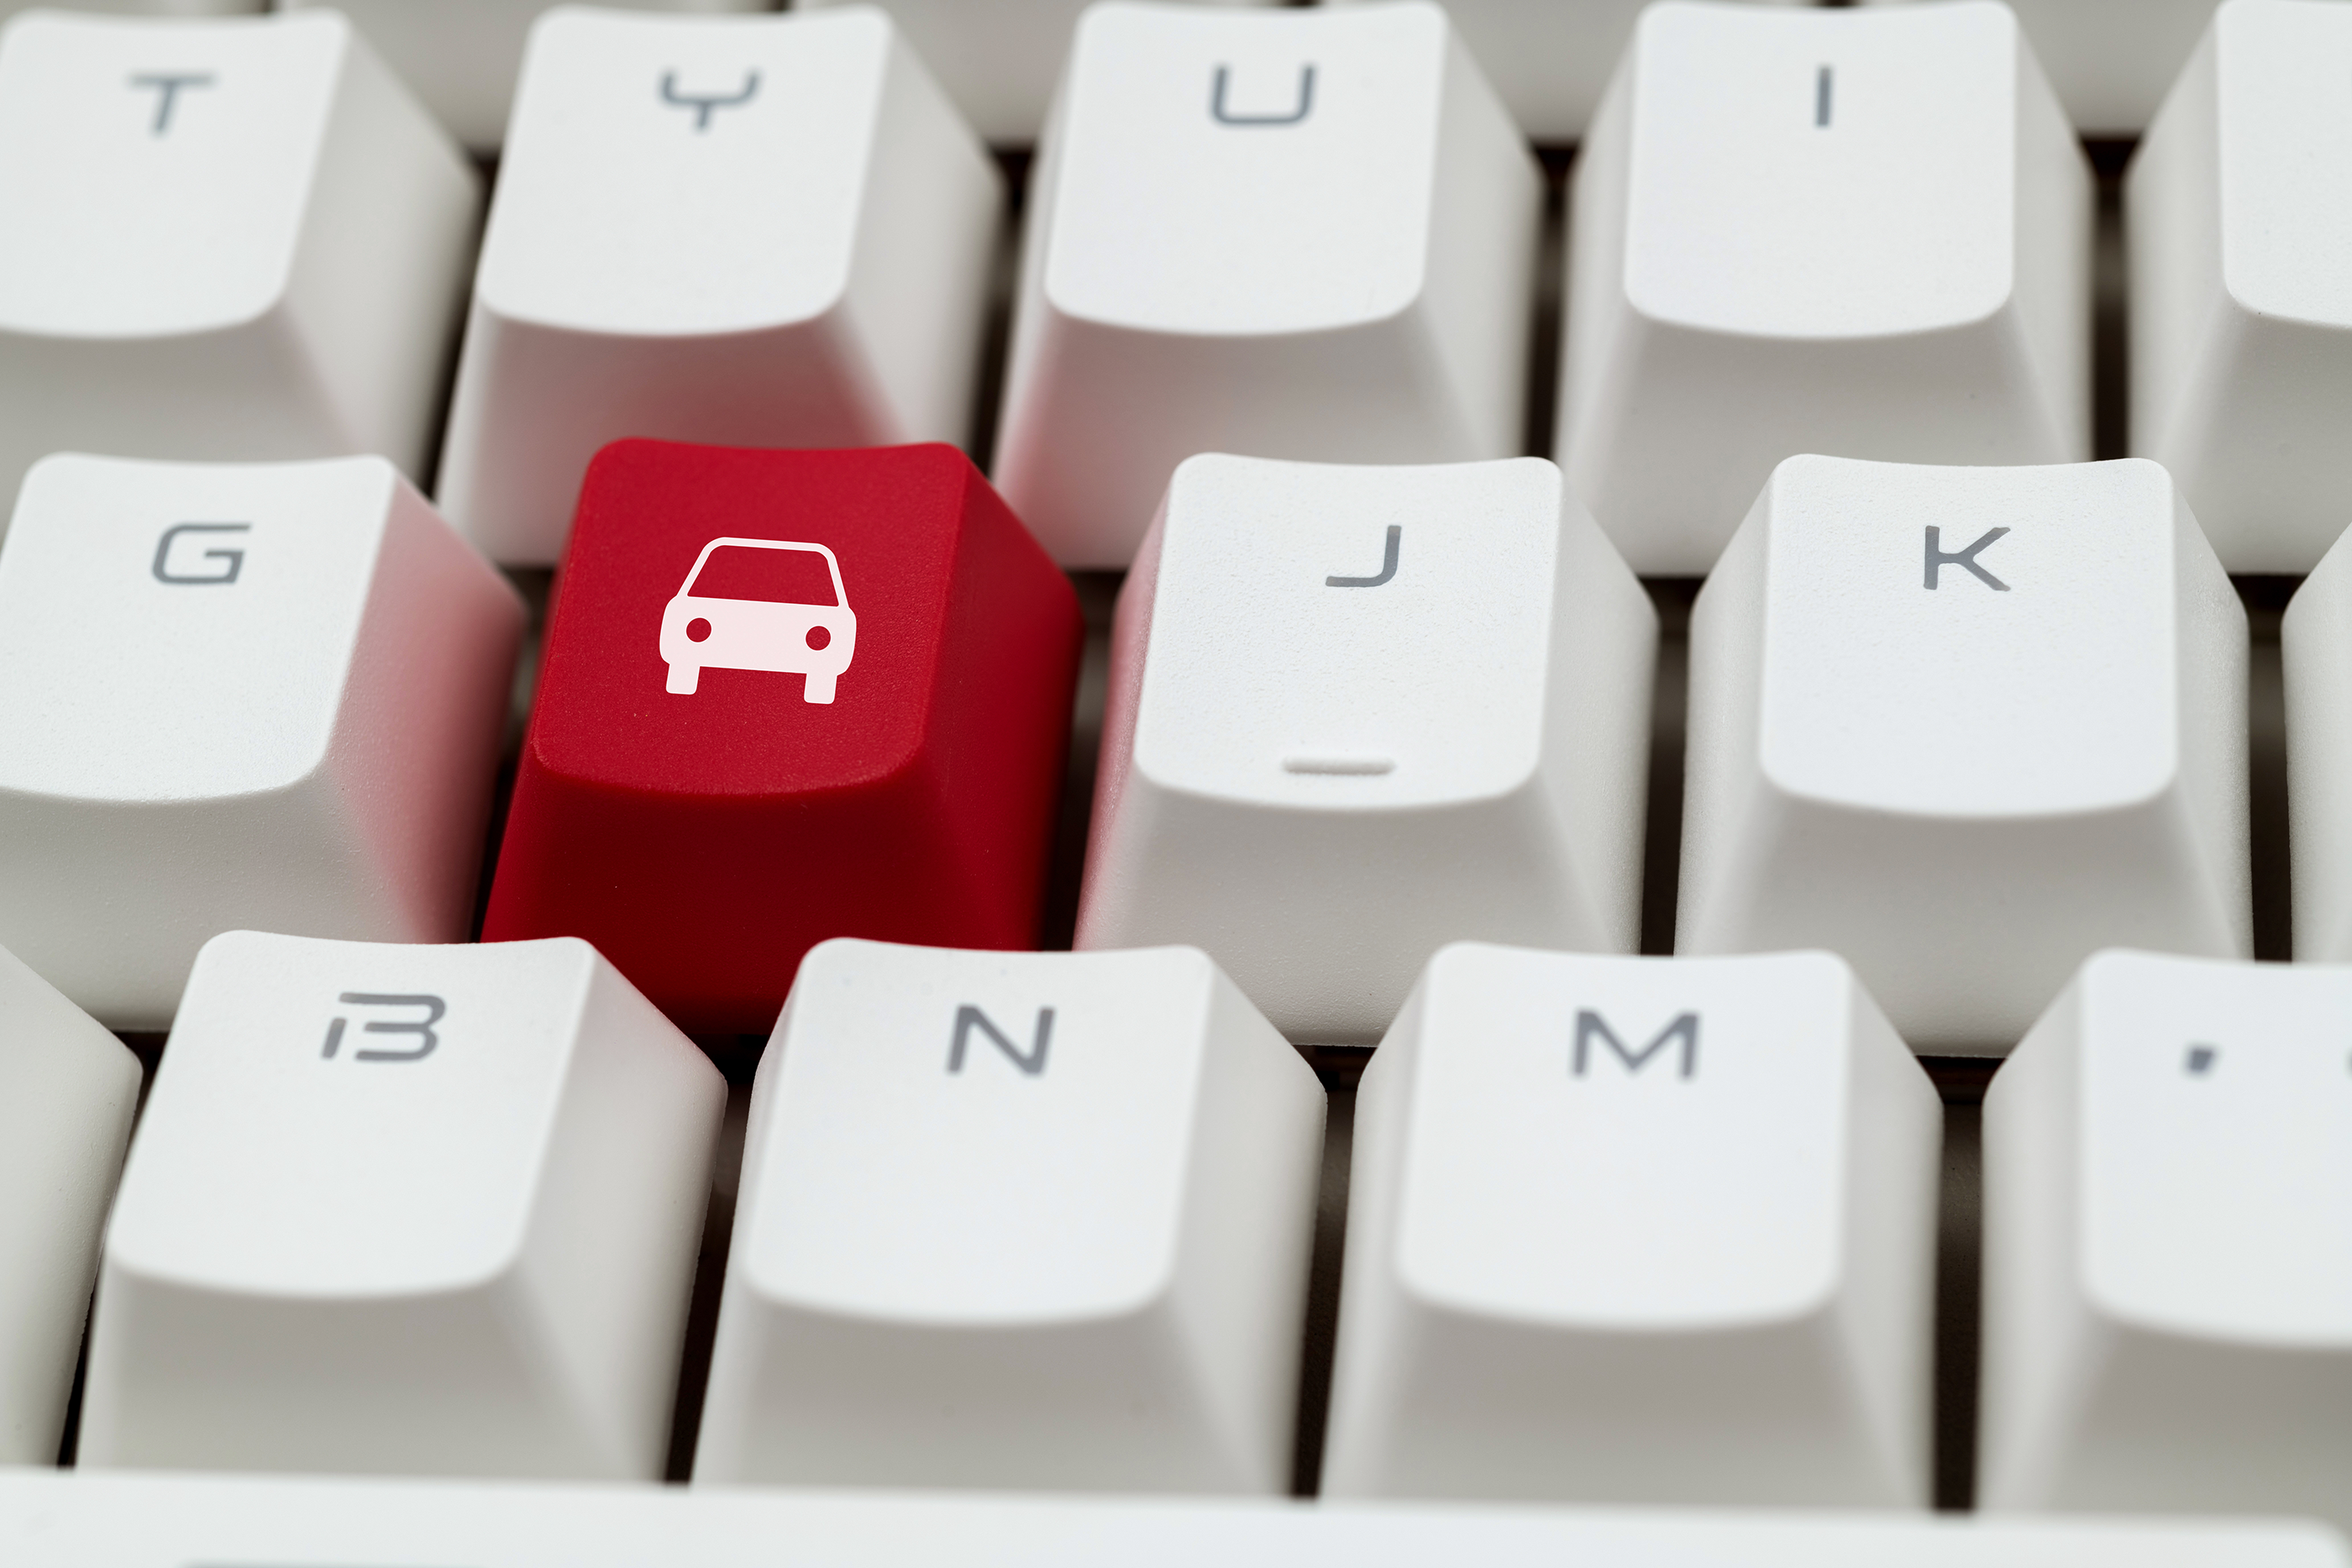 An image of a car icon on a keyboard.